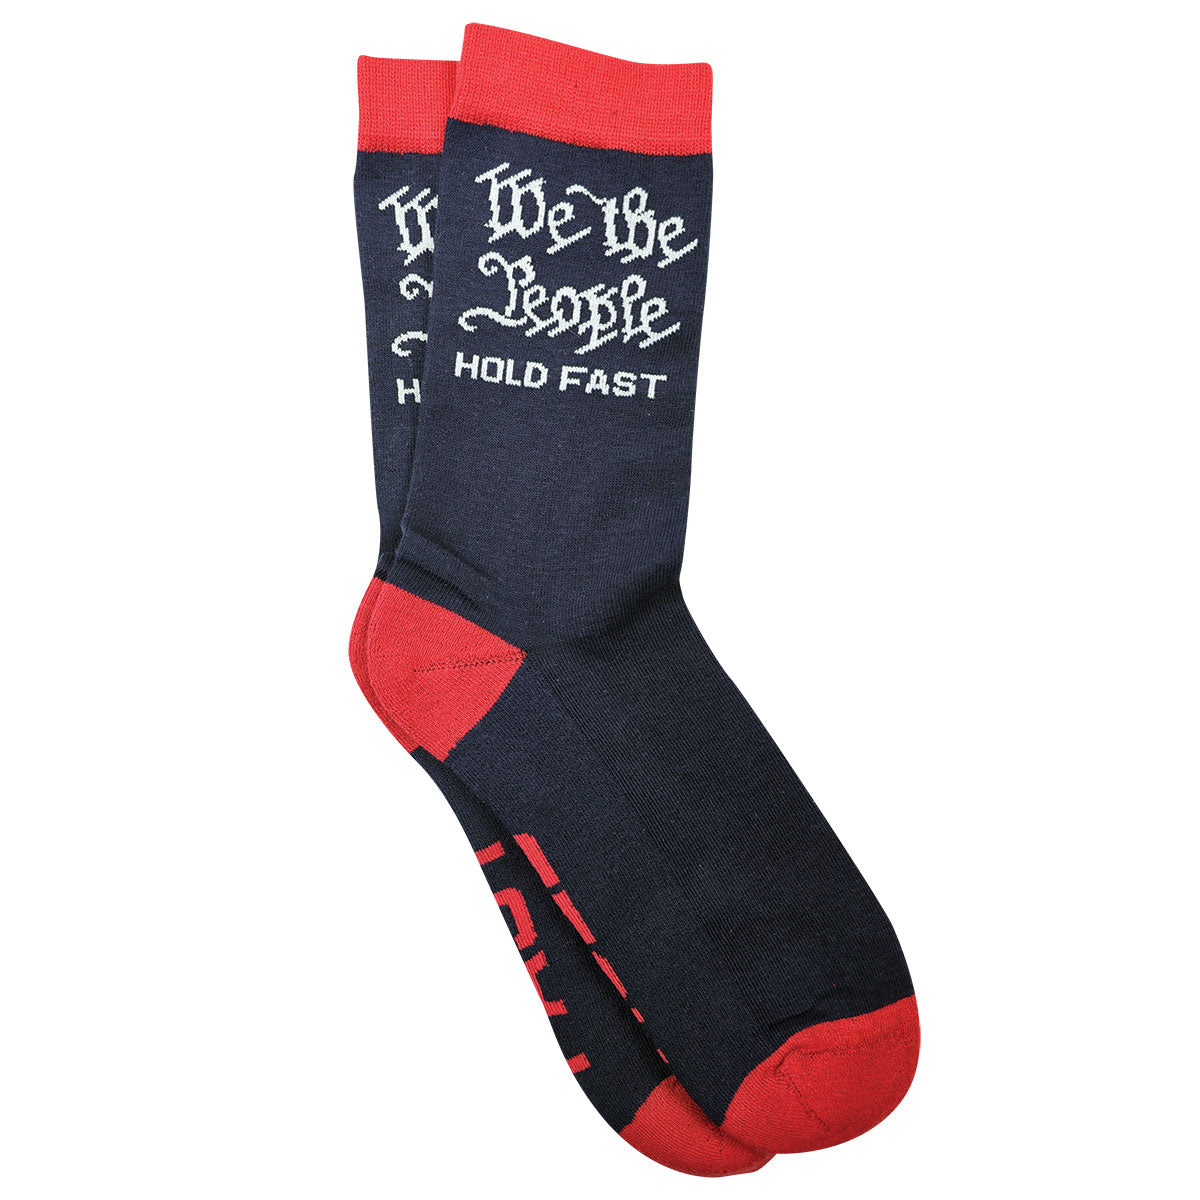 HOLD FAST Socks We the People